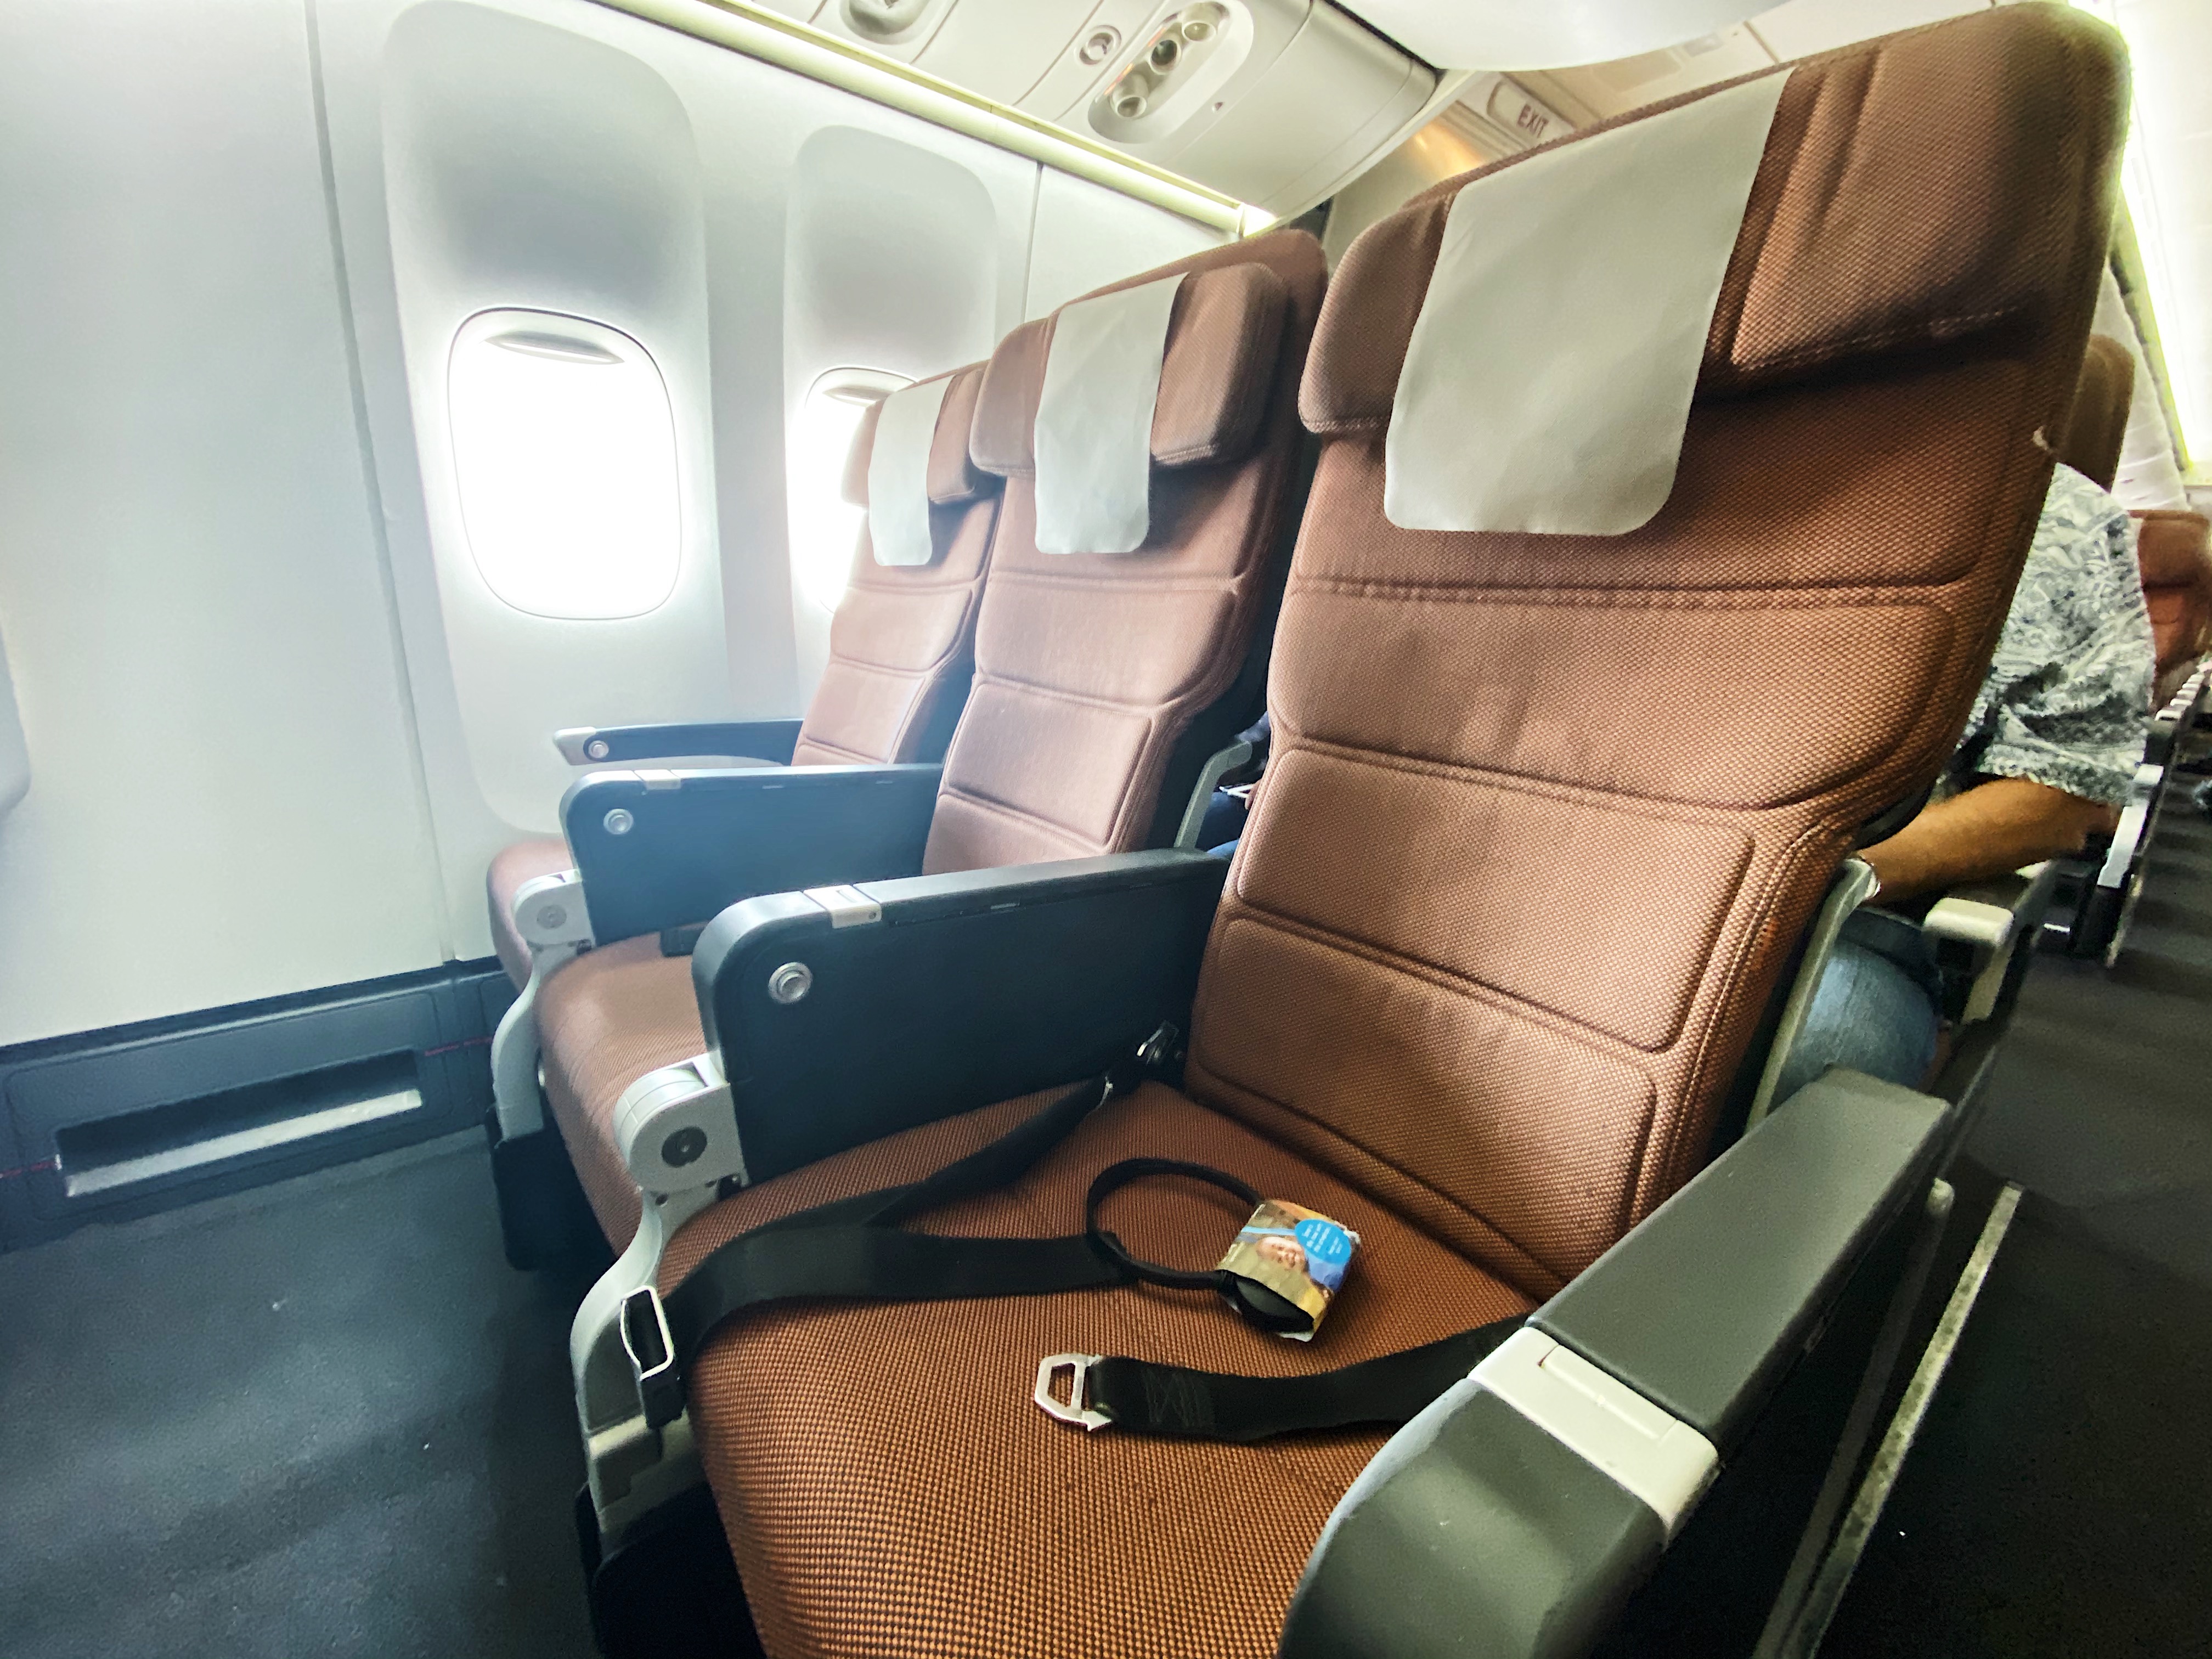 seats in an airplane with a seat belt and a seat belt